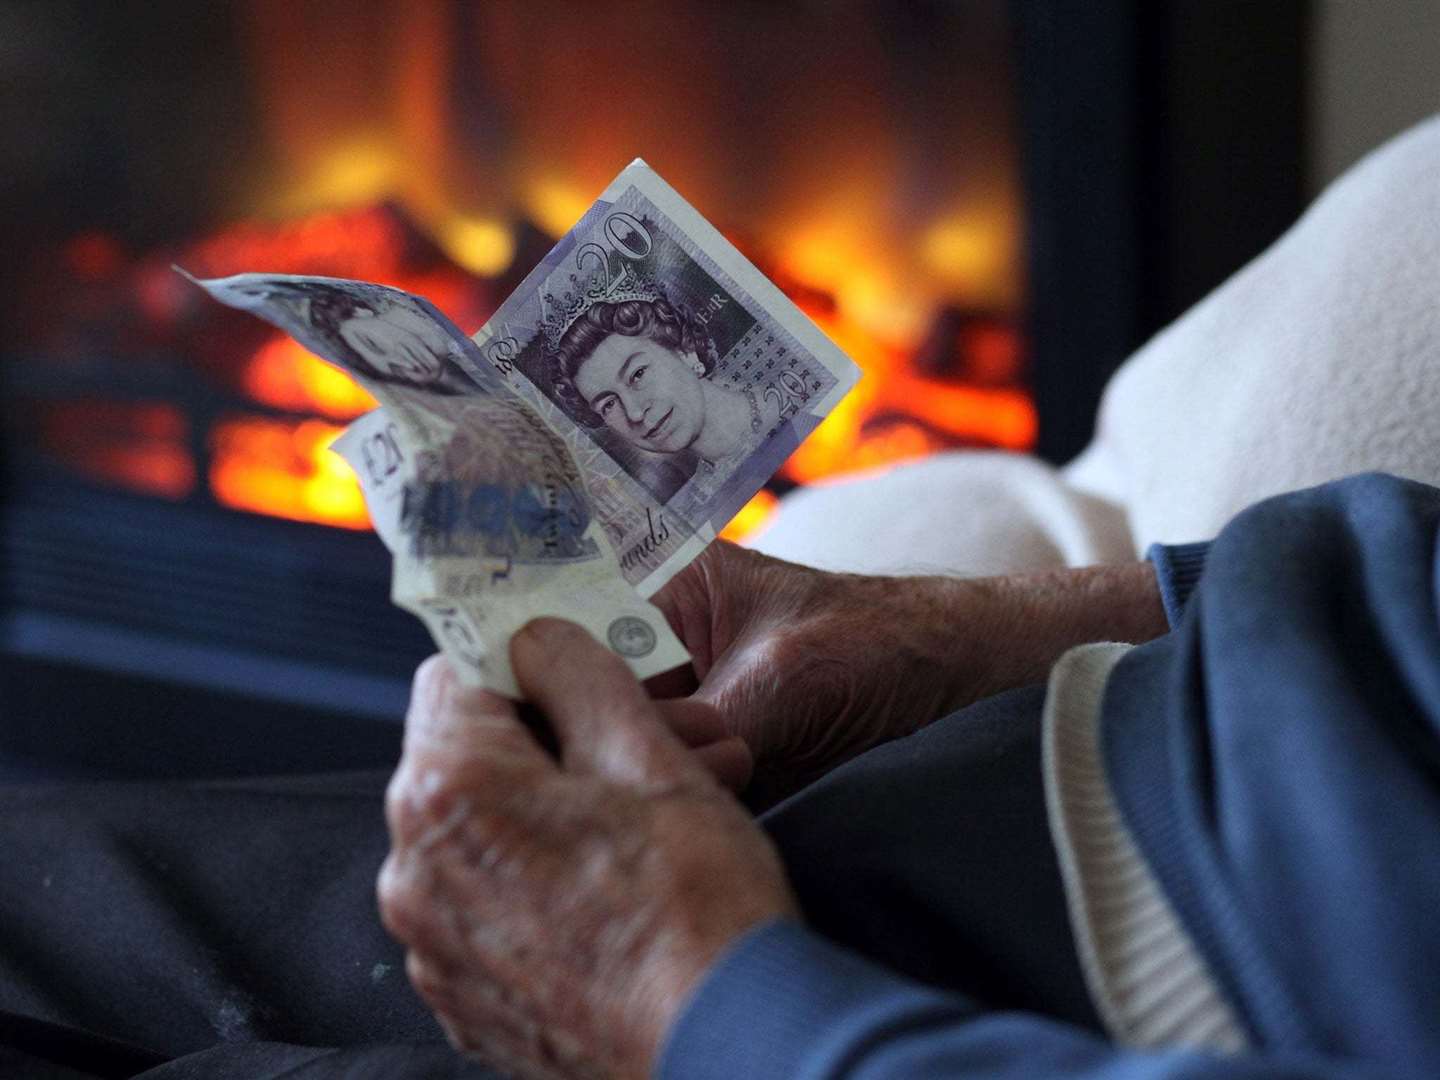 Consumers are bracing themselves for more rises in their energy bills.